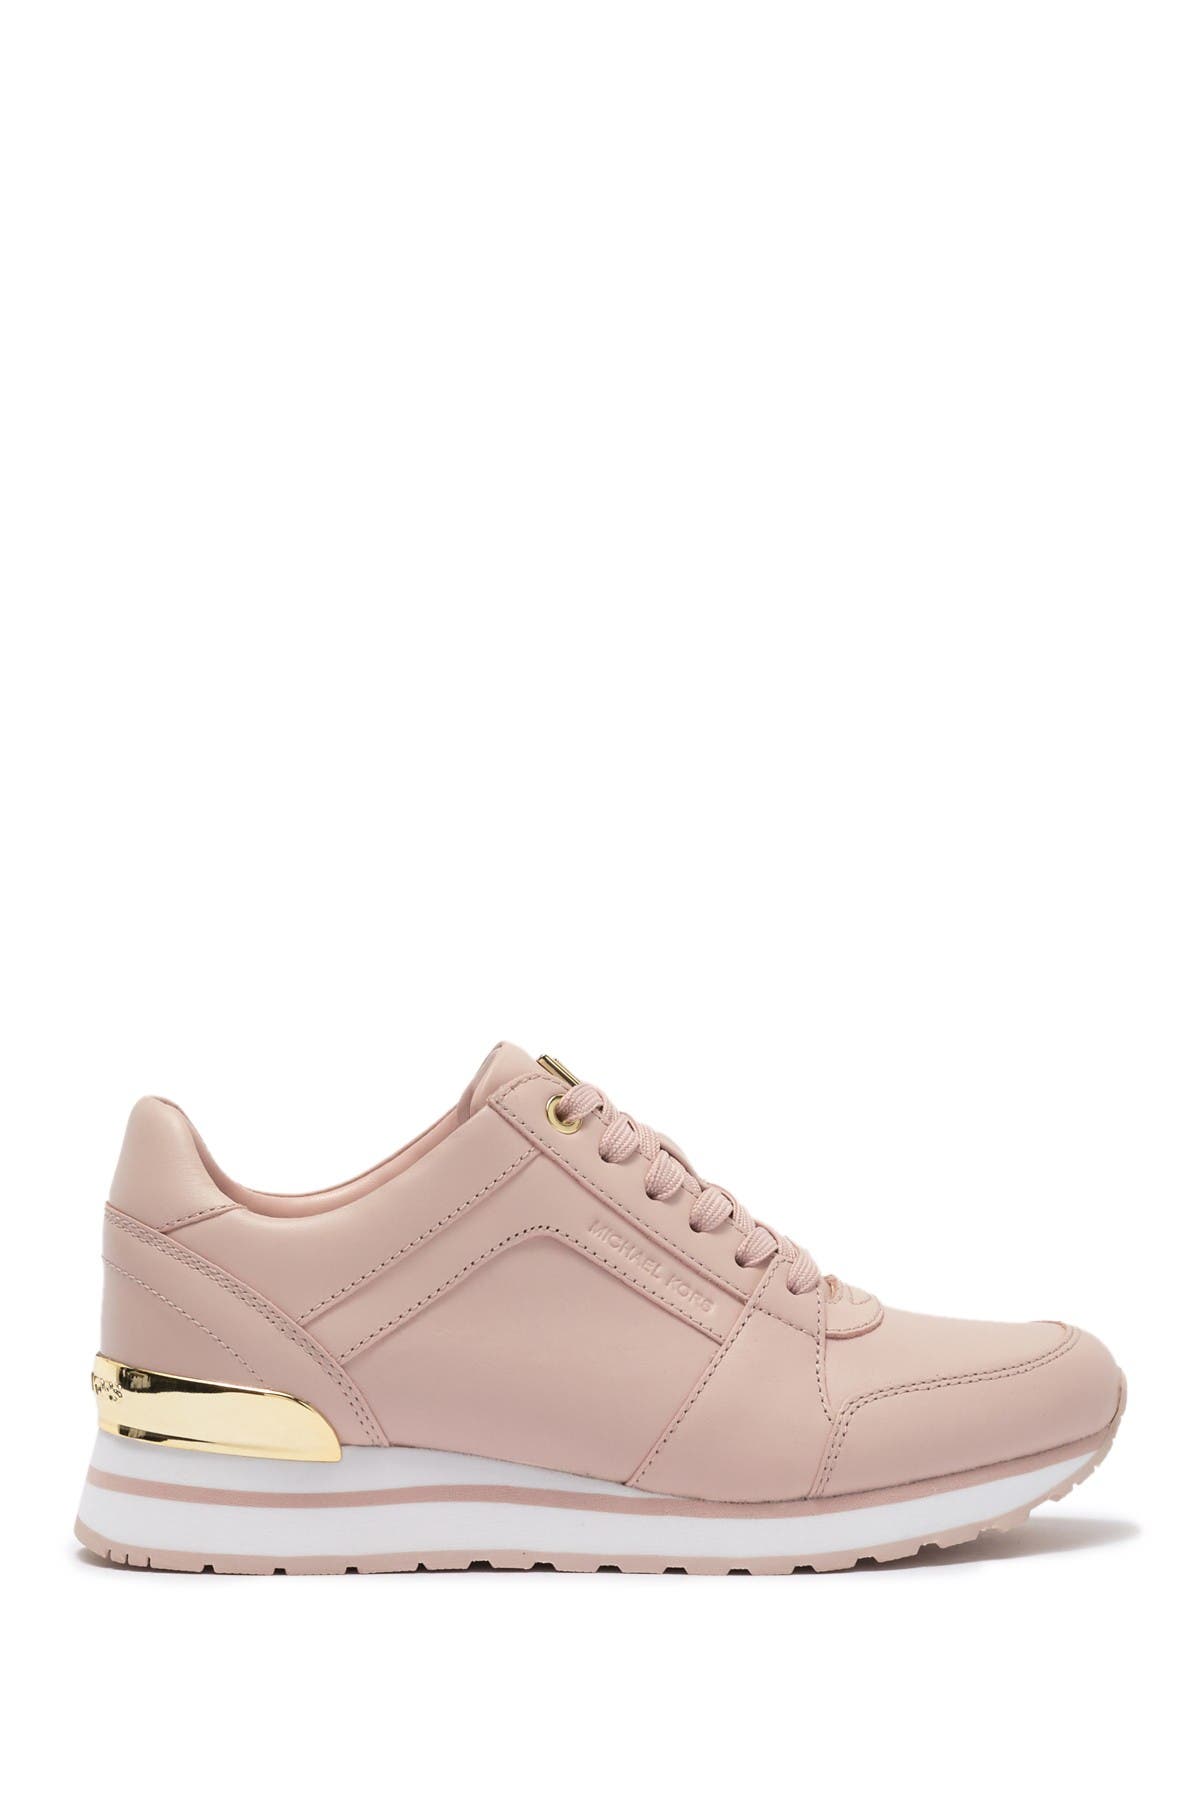 michael kors billie trainer lace up sneakers